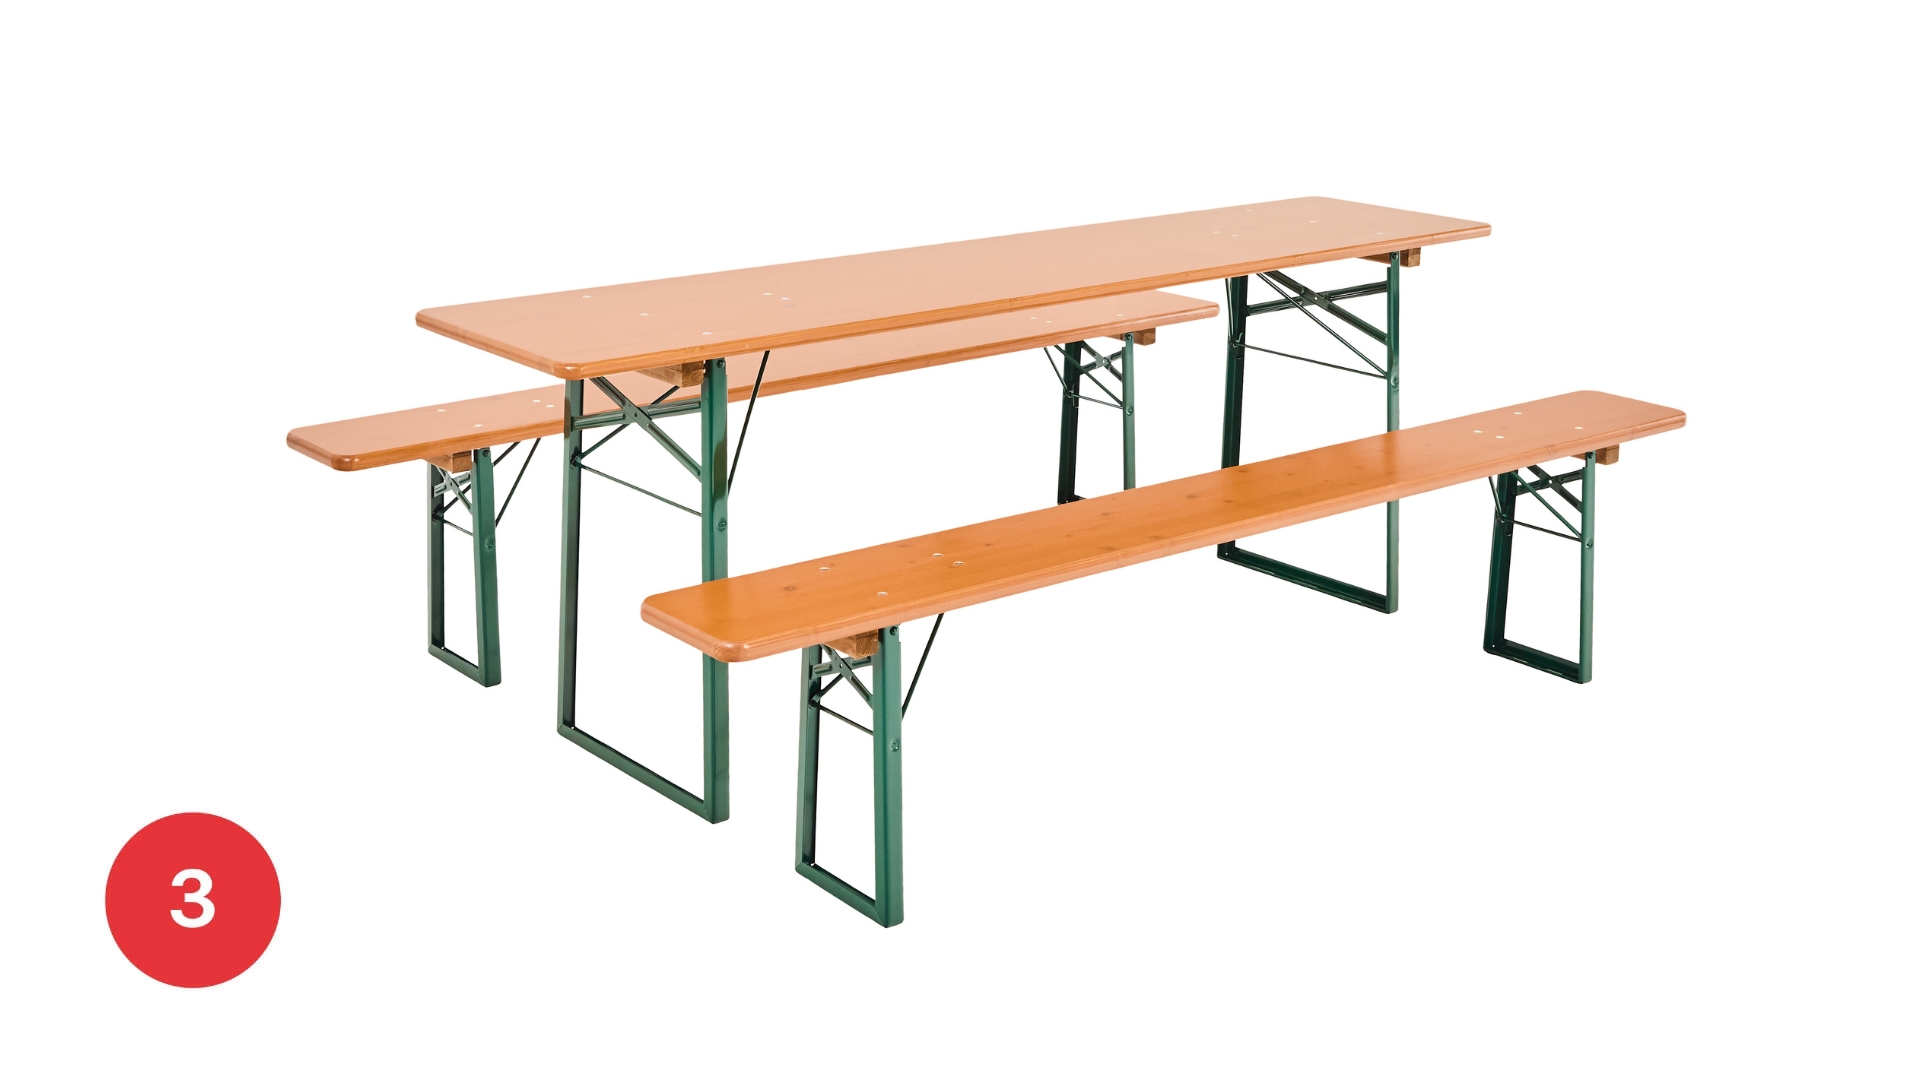 The classic beer garden table set in the color pine.